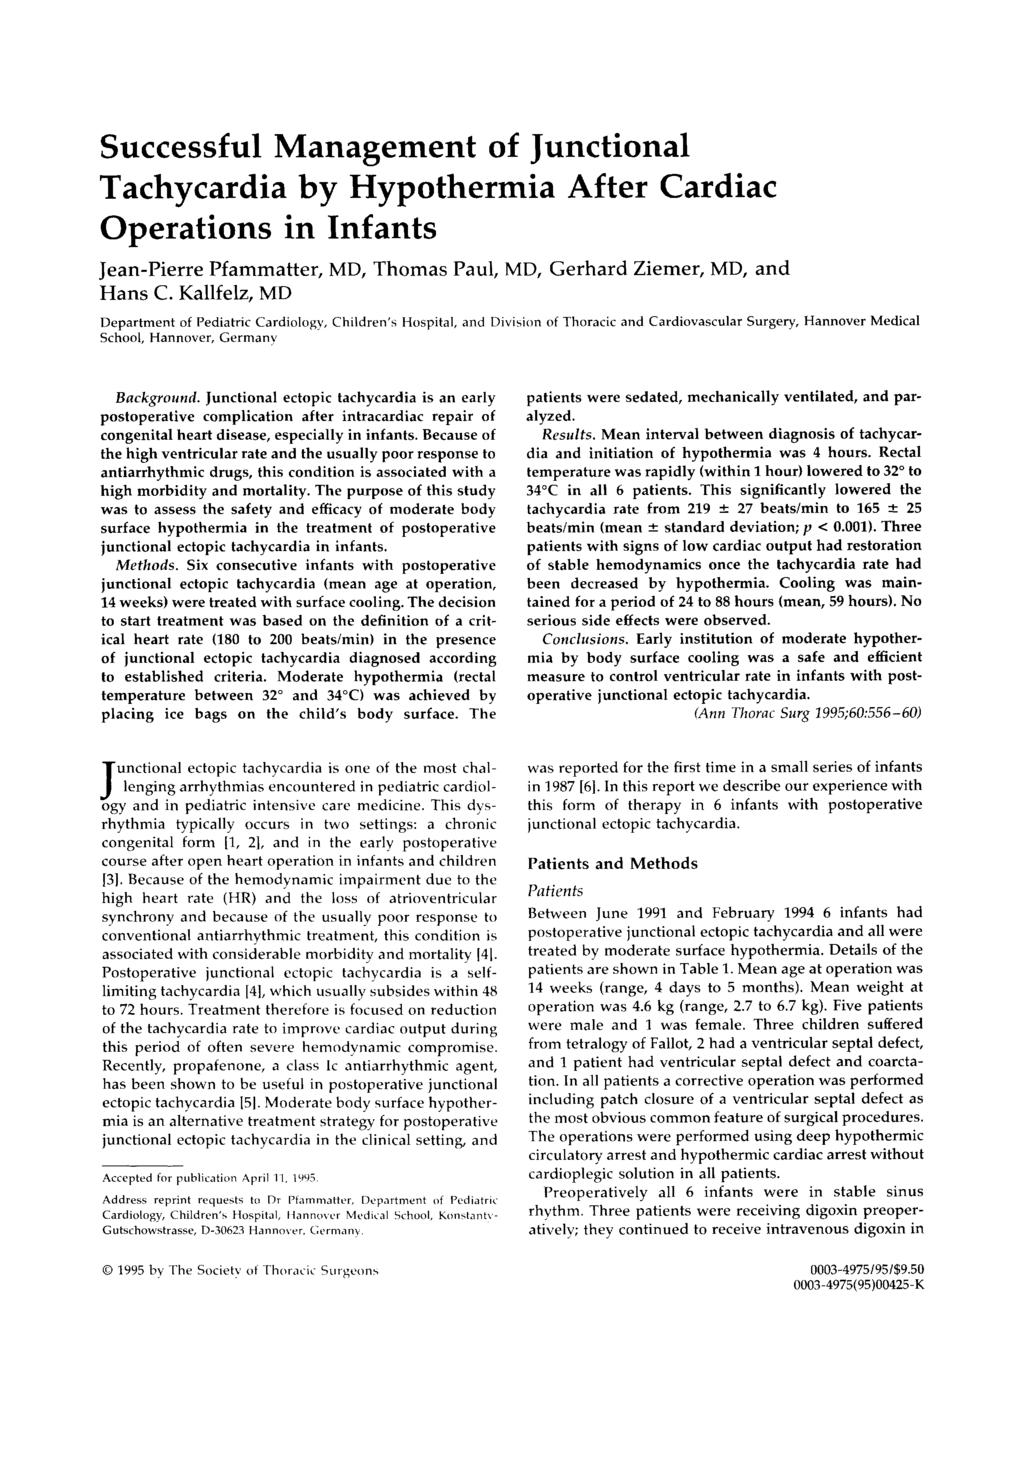 Successful Management of Junctional Tachycardia by Hypothermia After Cardiac Operations in Infants Jean-Pierre Pfammatter, MD, Thomas Paul, MD, Gerhard Ziemer, MD, and Hans C.